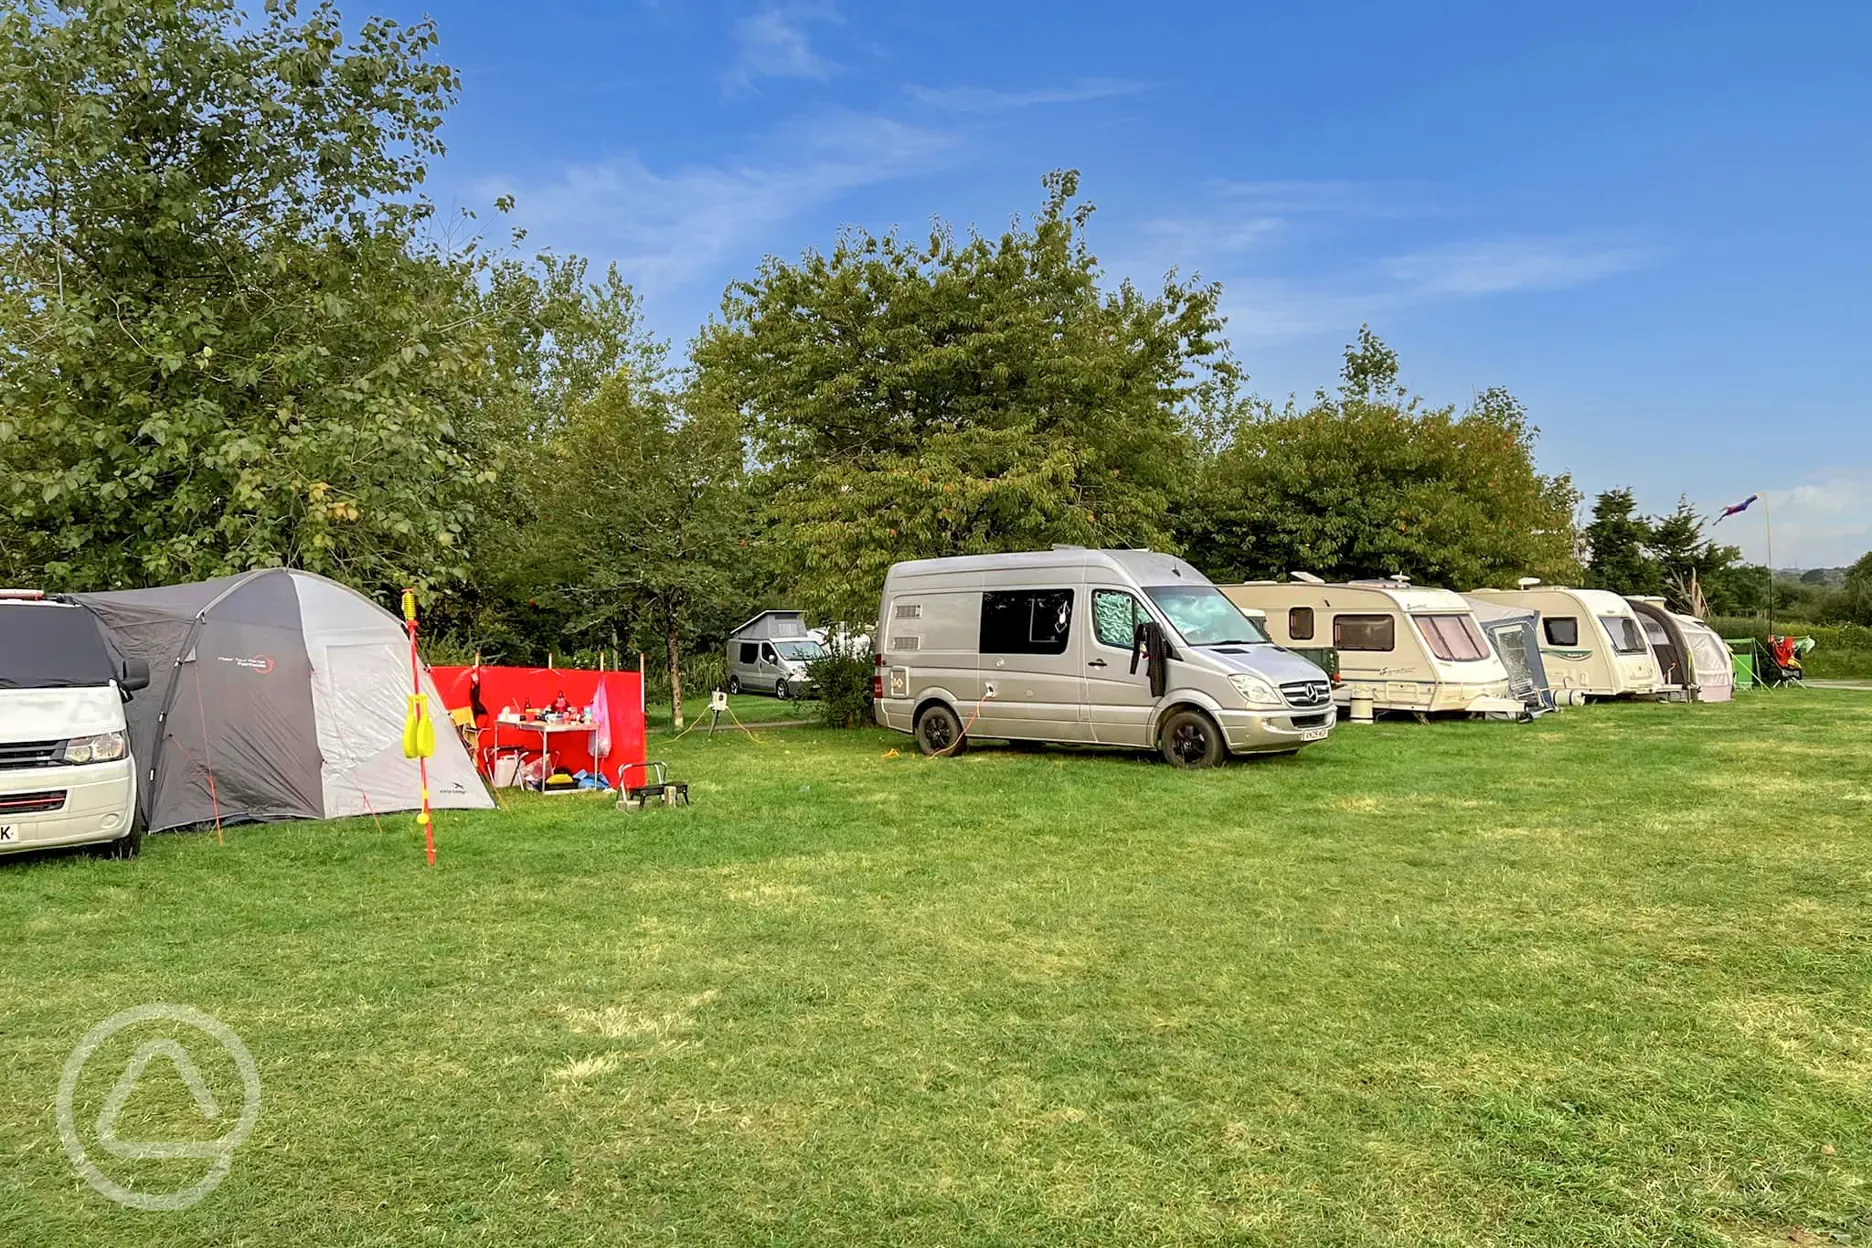 Electric grass touring pitches